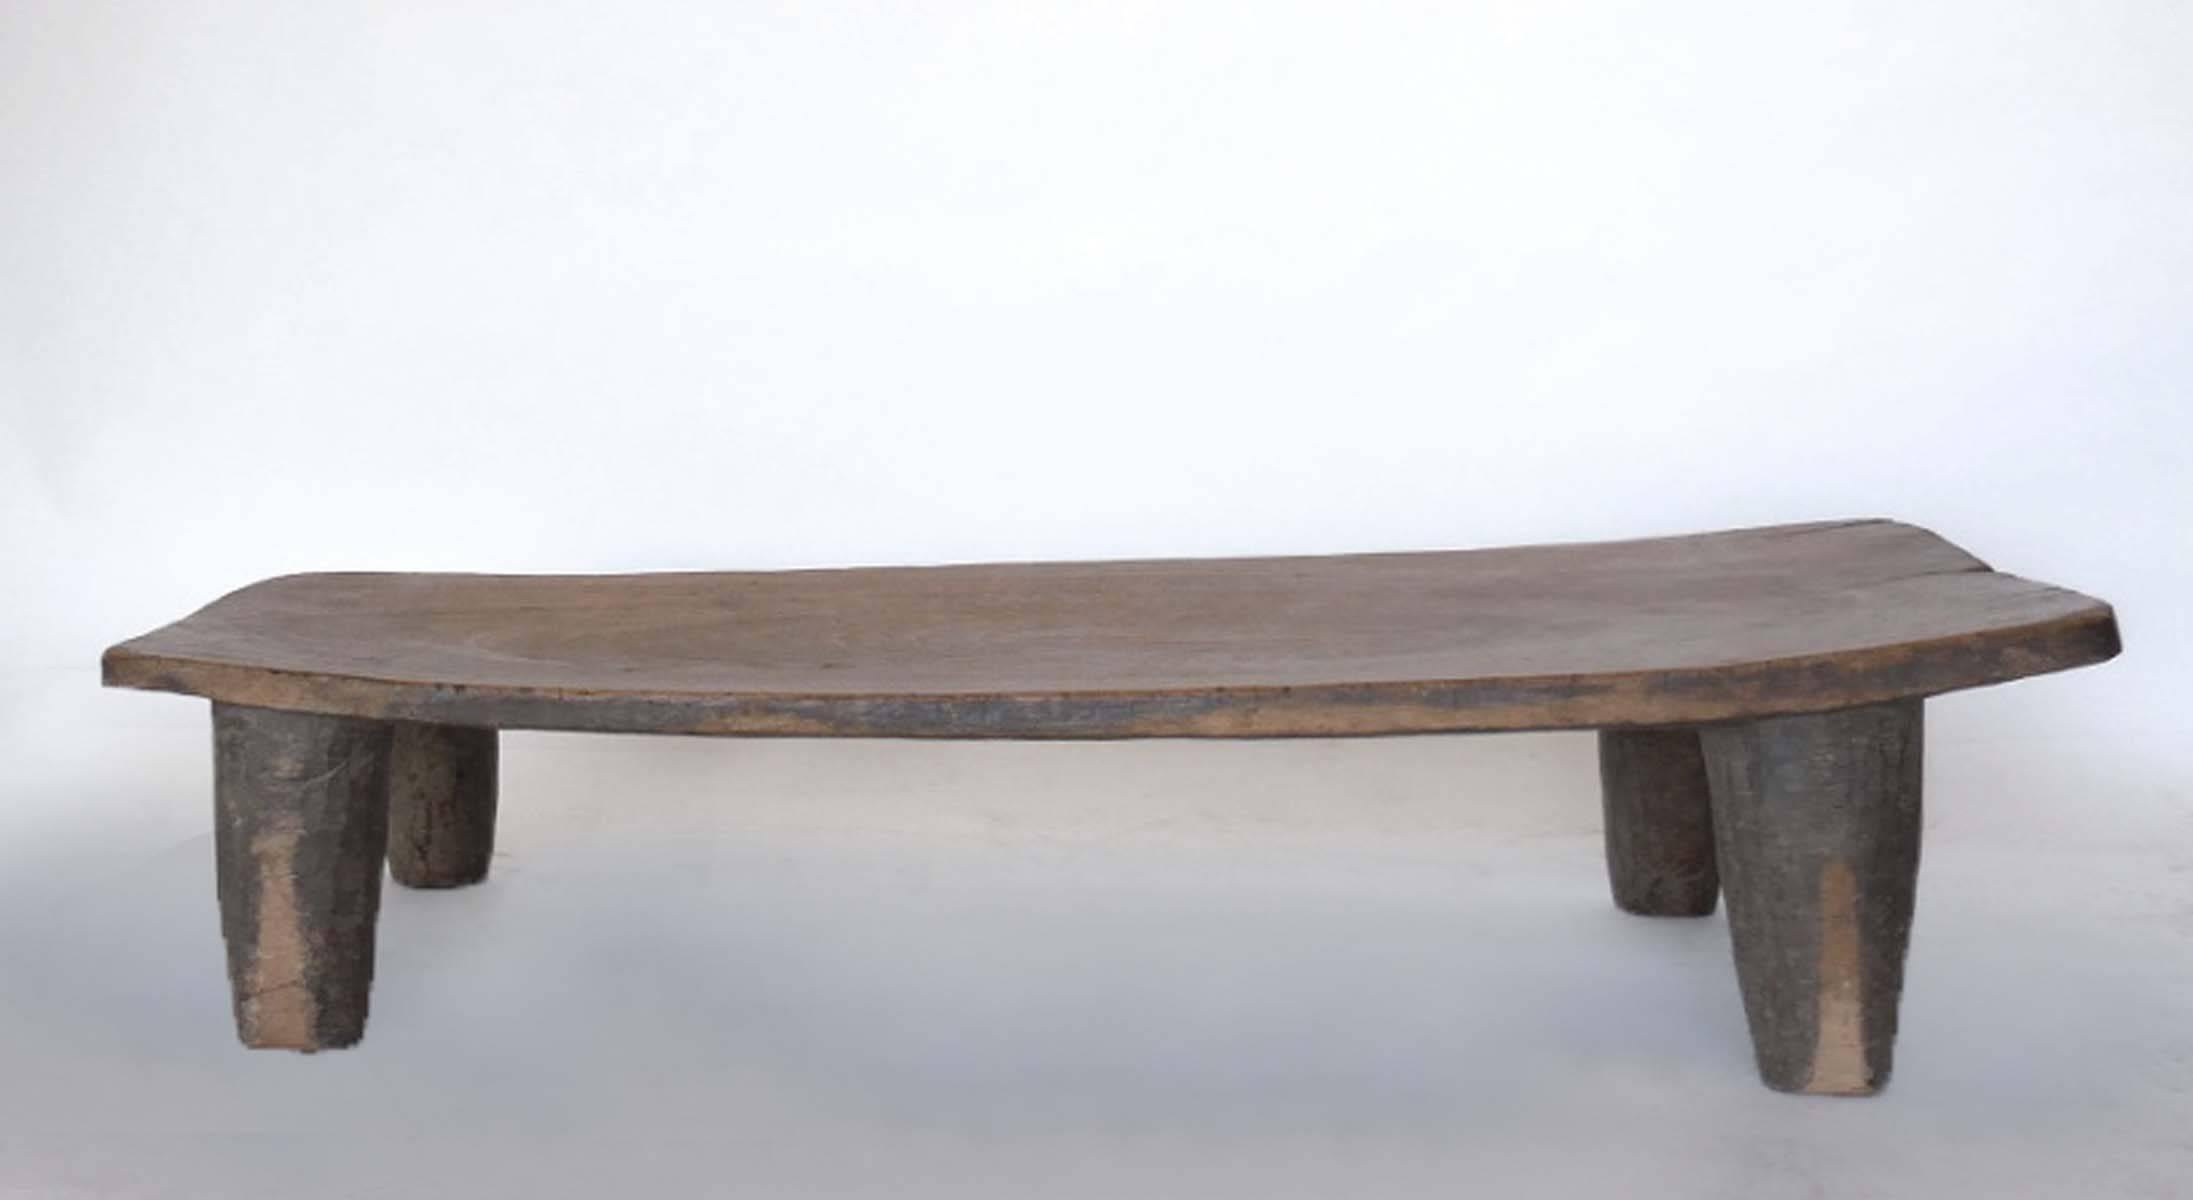 Tribal Antique African Nupe Child's Bed, Coffee Table or Bench